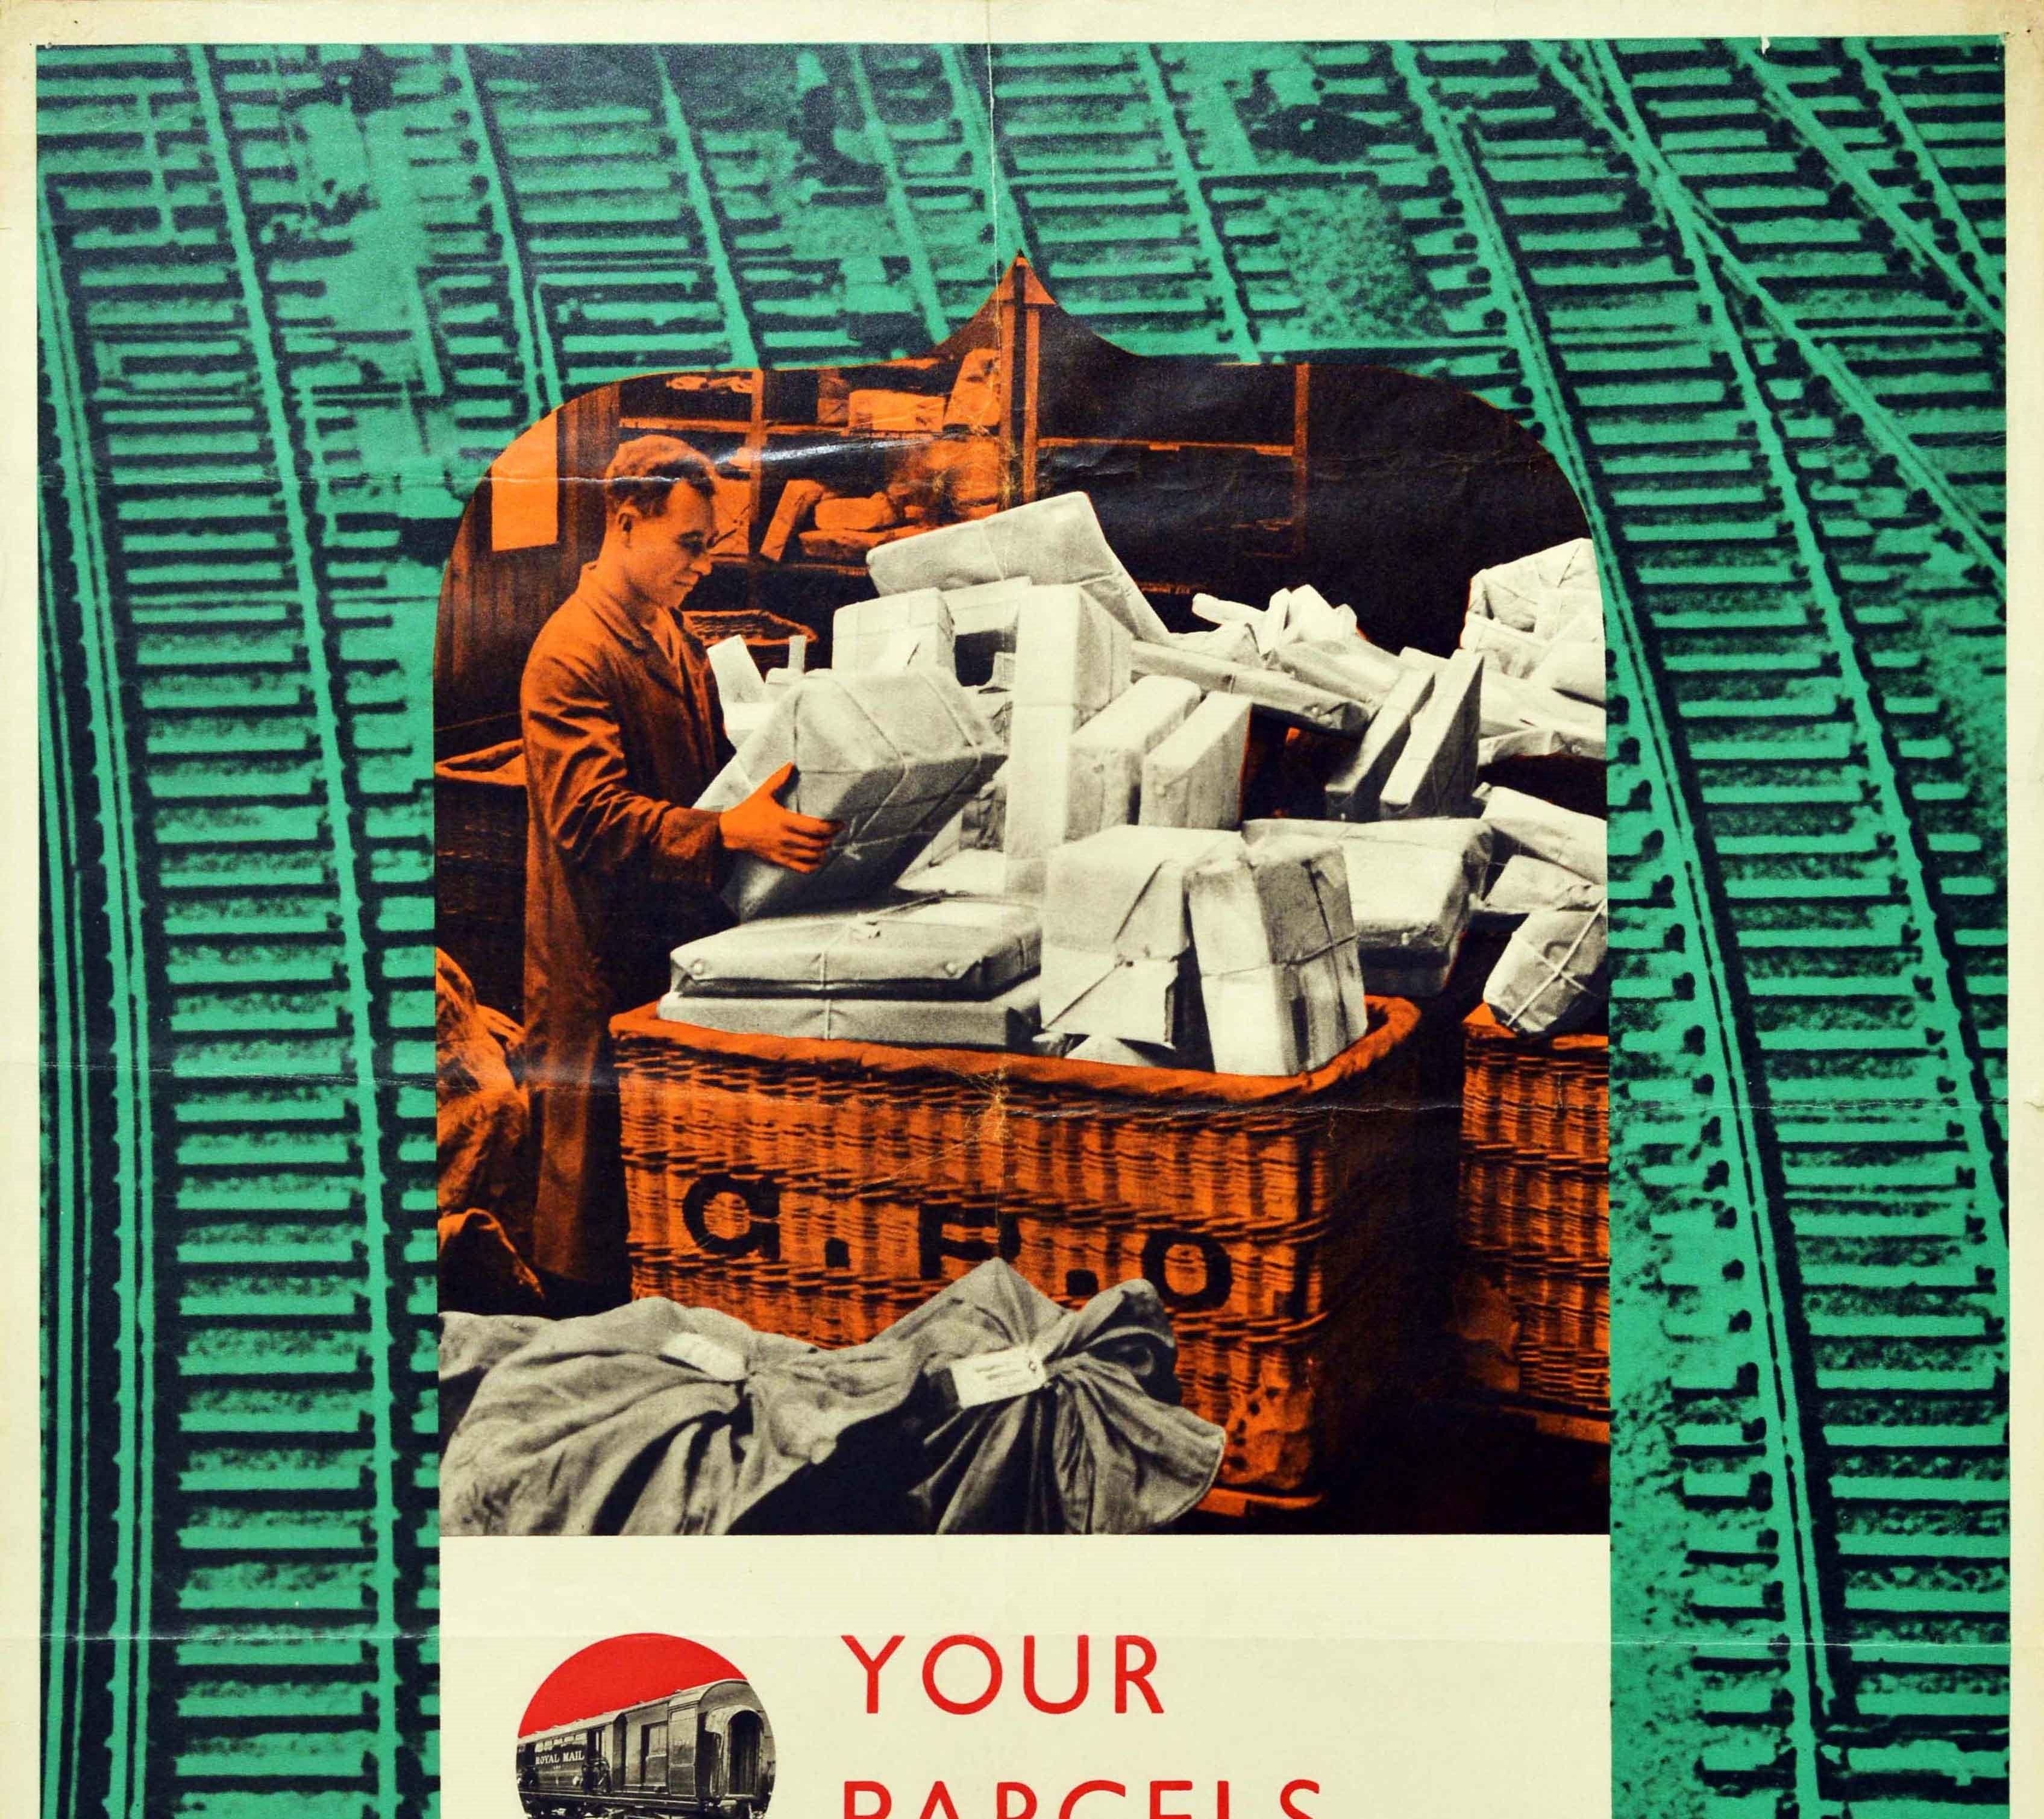 Original vintage propaganda poster printed by British Railways during World War Two - Your Parcels and Letters Depend on the Lines Behind the Lines - one of a series of war effort posters highlighting the importance of railway services for